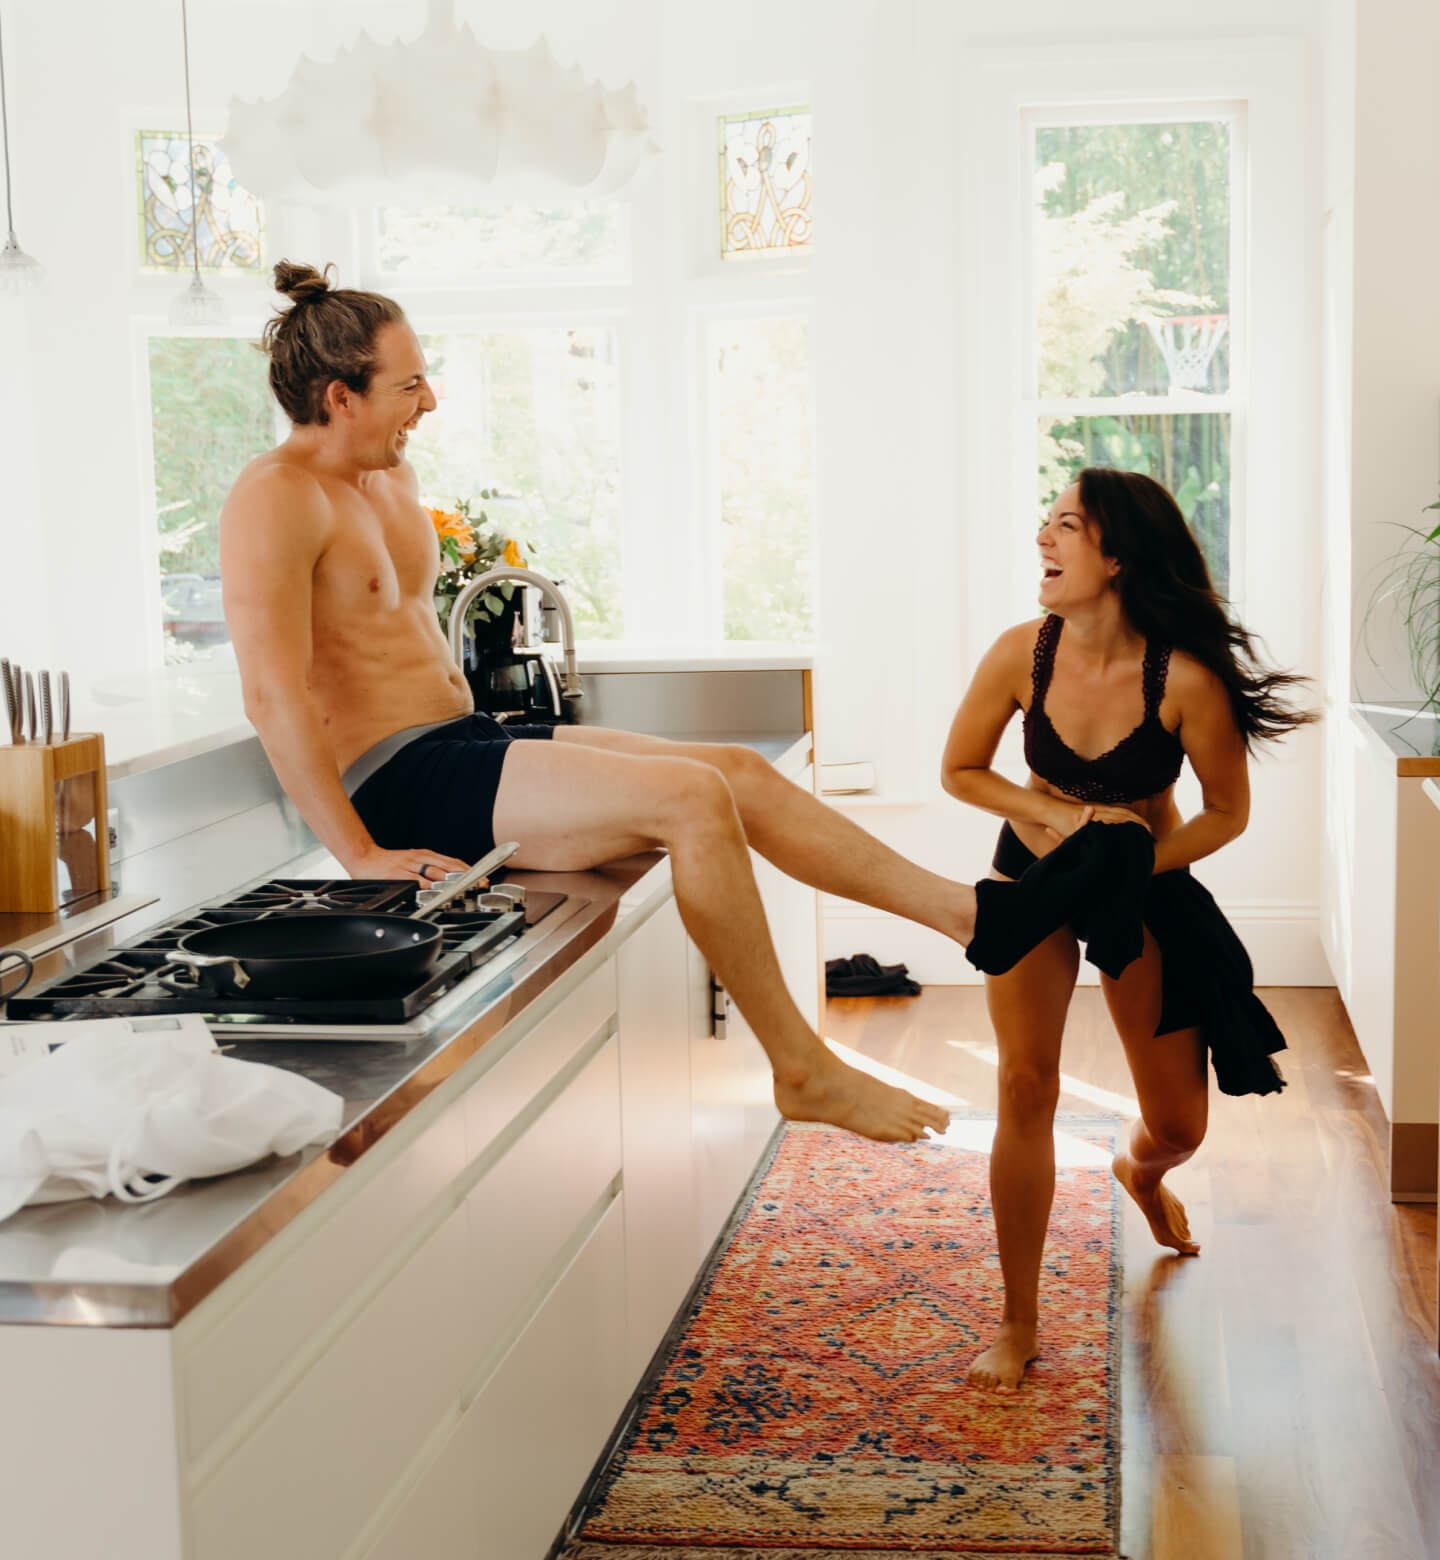 a man sits on the counter and laughs as his wife is being silly and taking off his pants